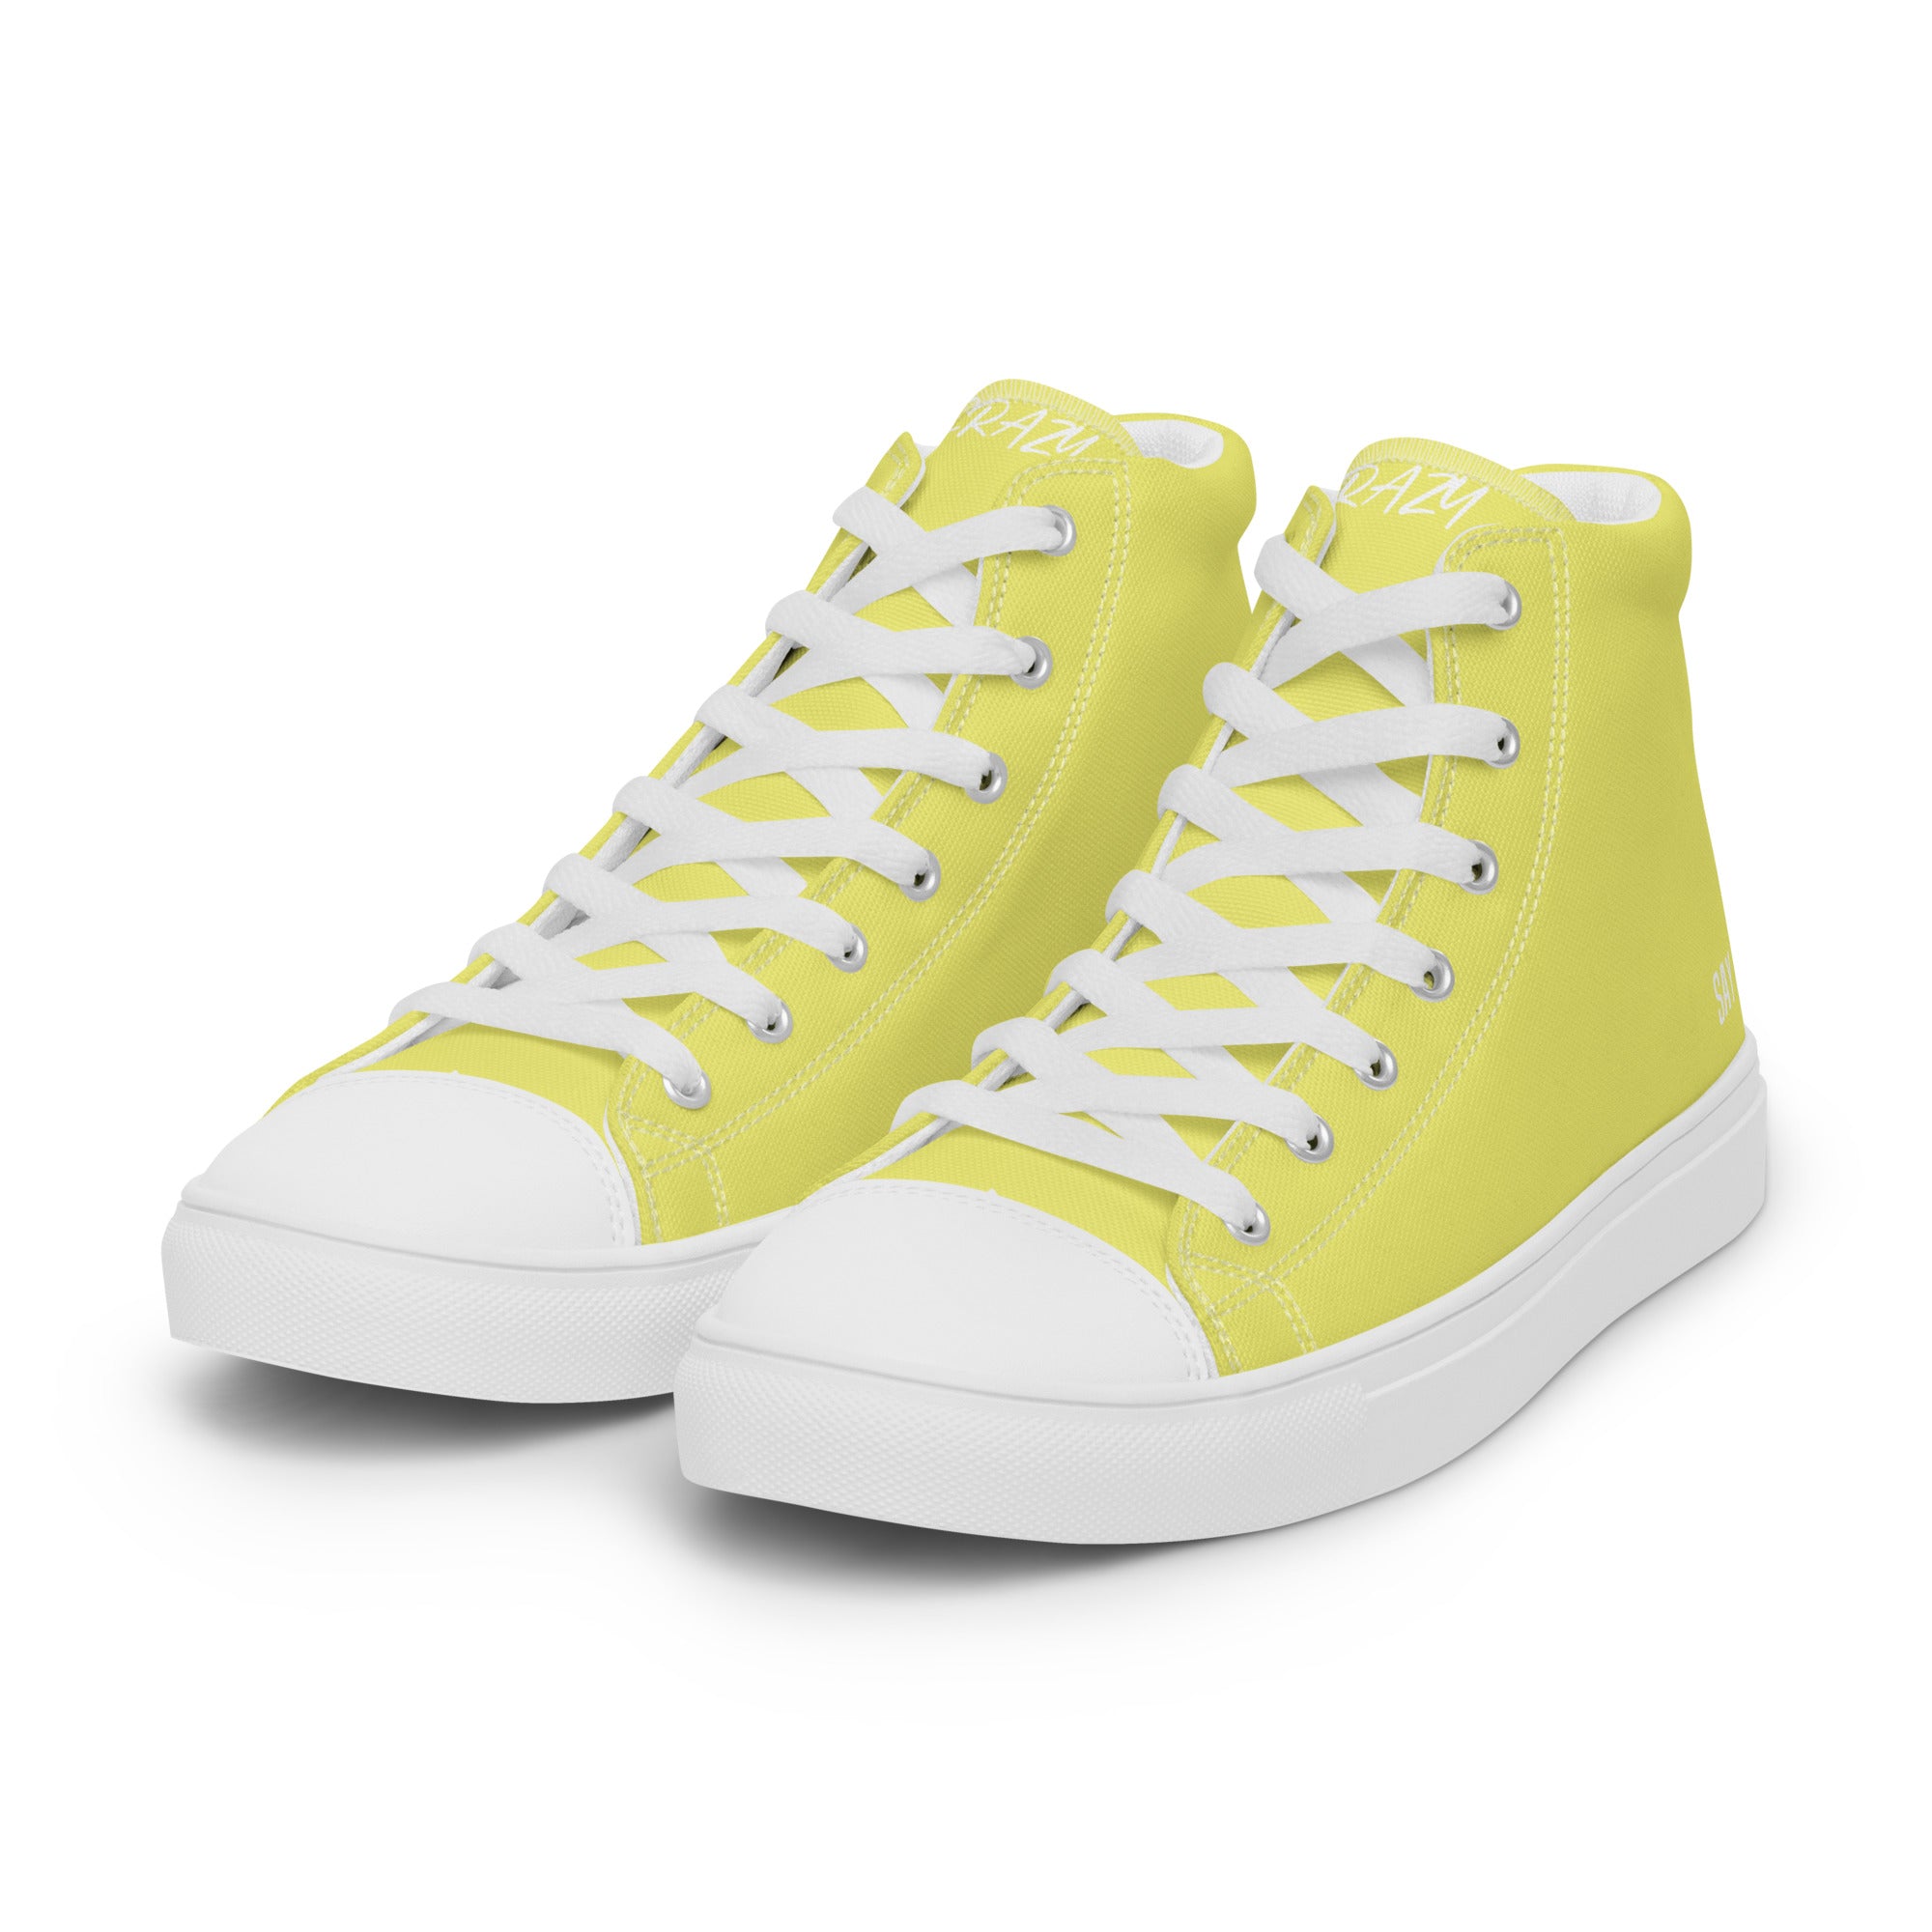 "SAY MY NAME" men's high yellow canvas sneakers